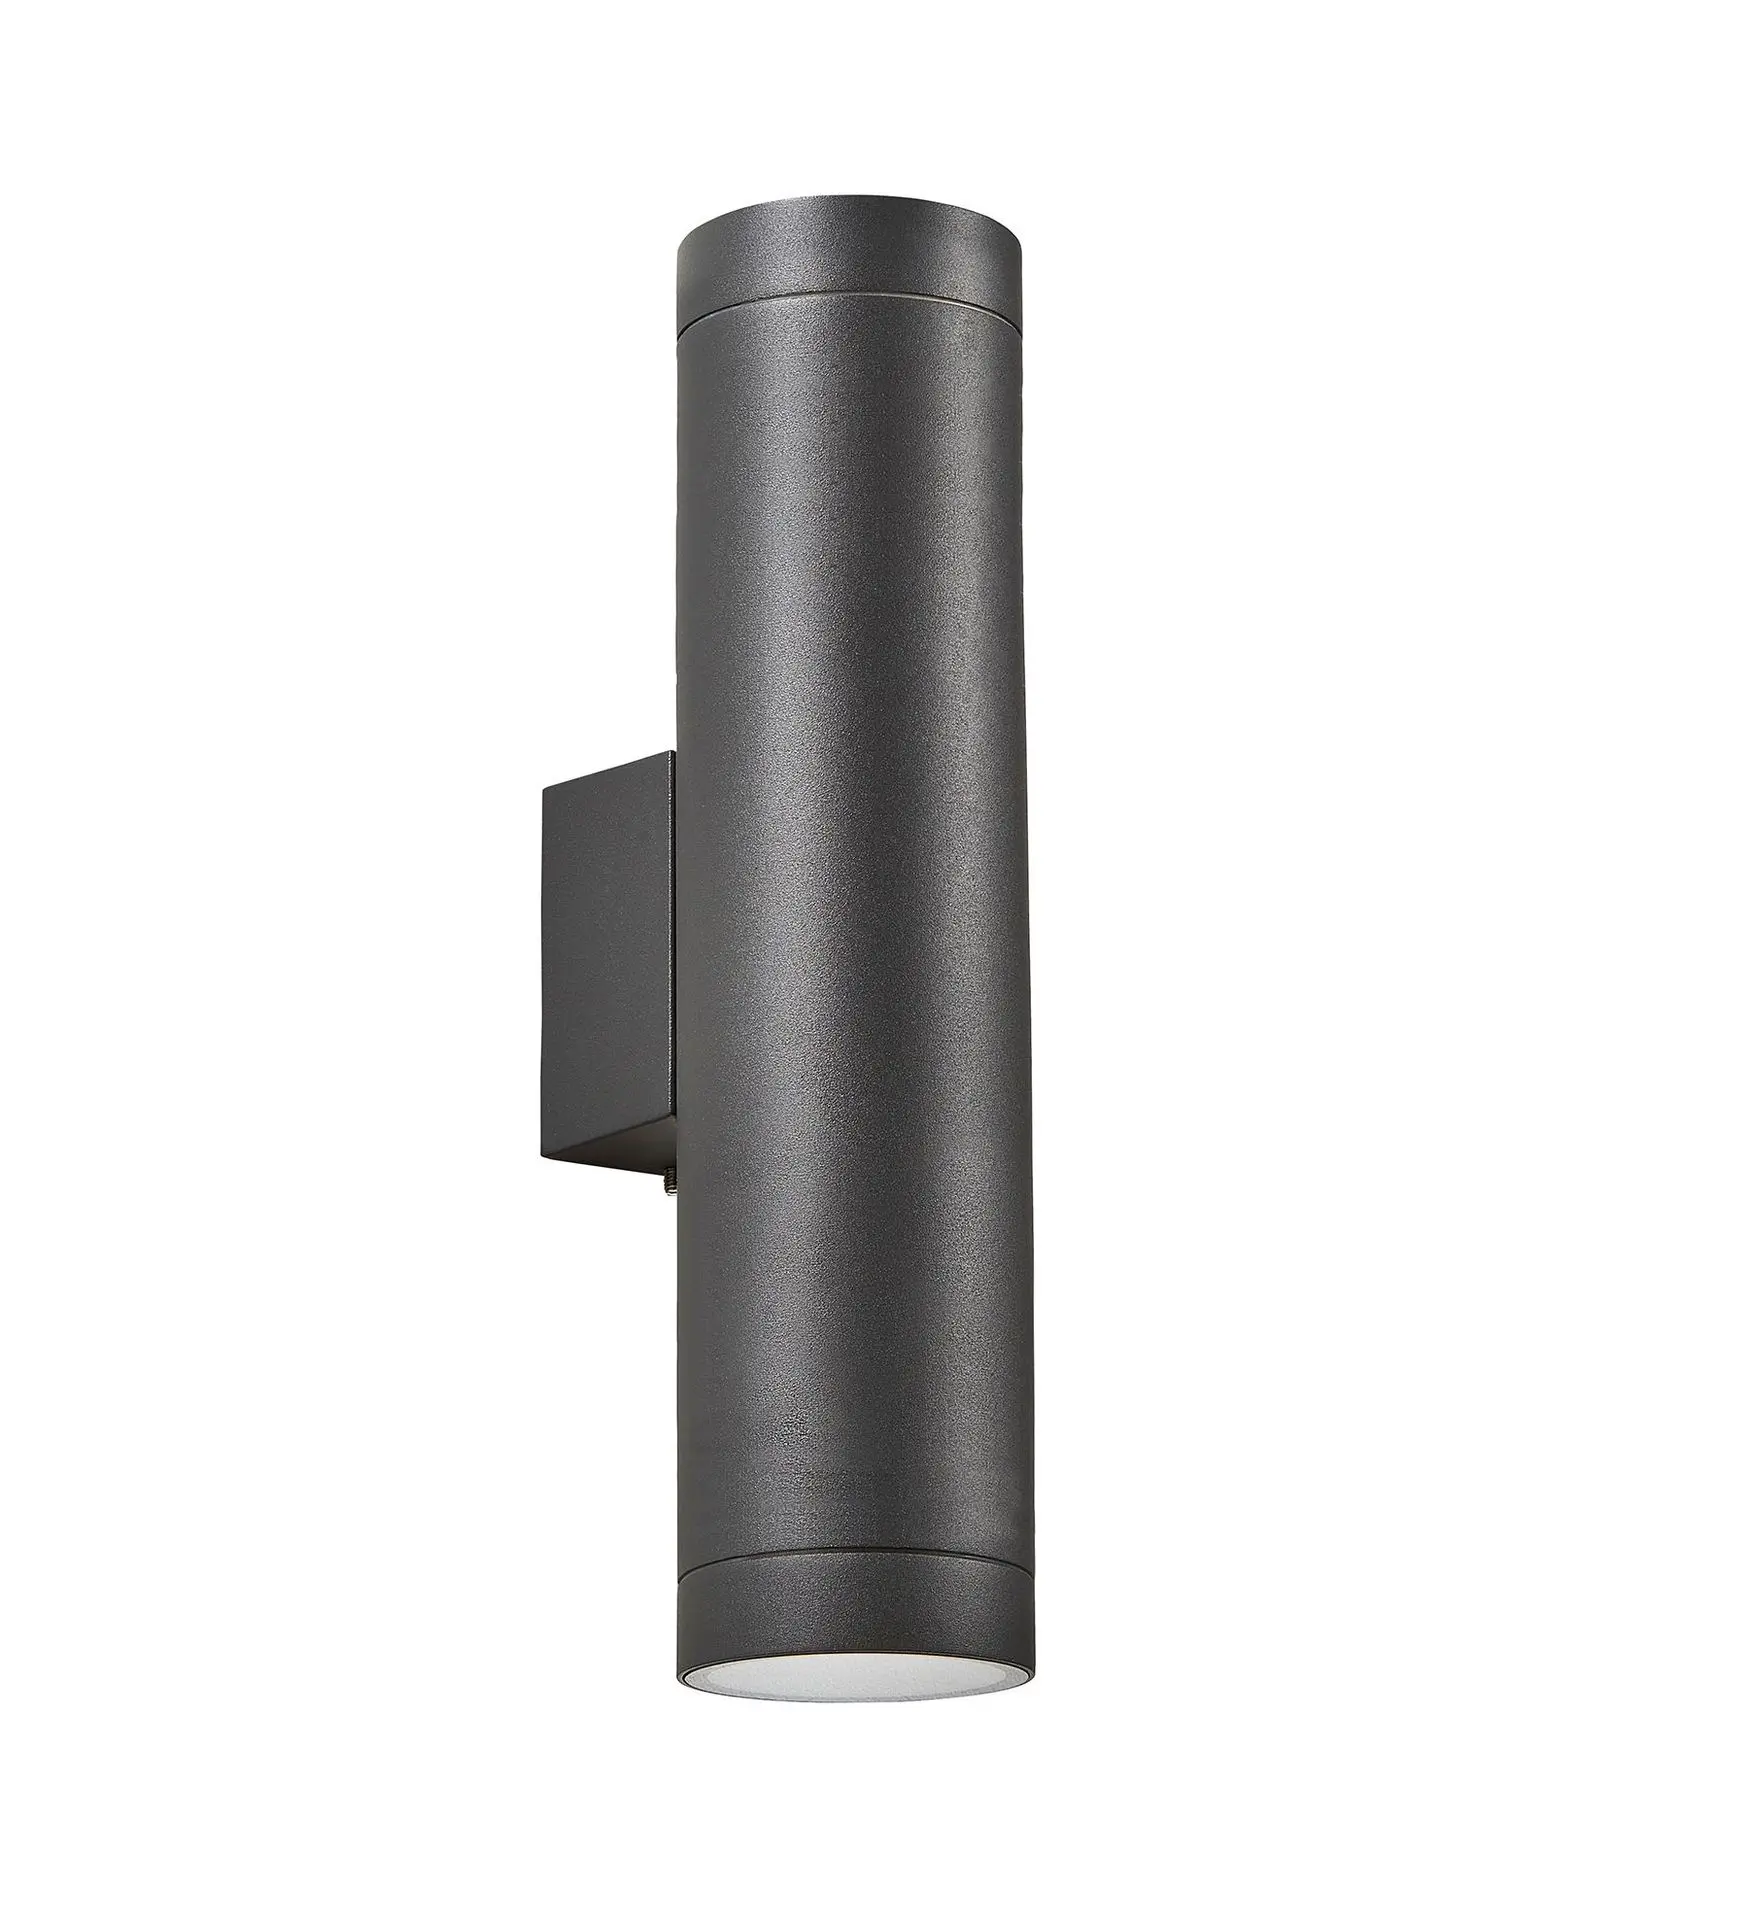 Morro Up & Down Wall Light in Anthracite Finish